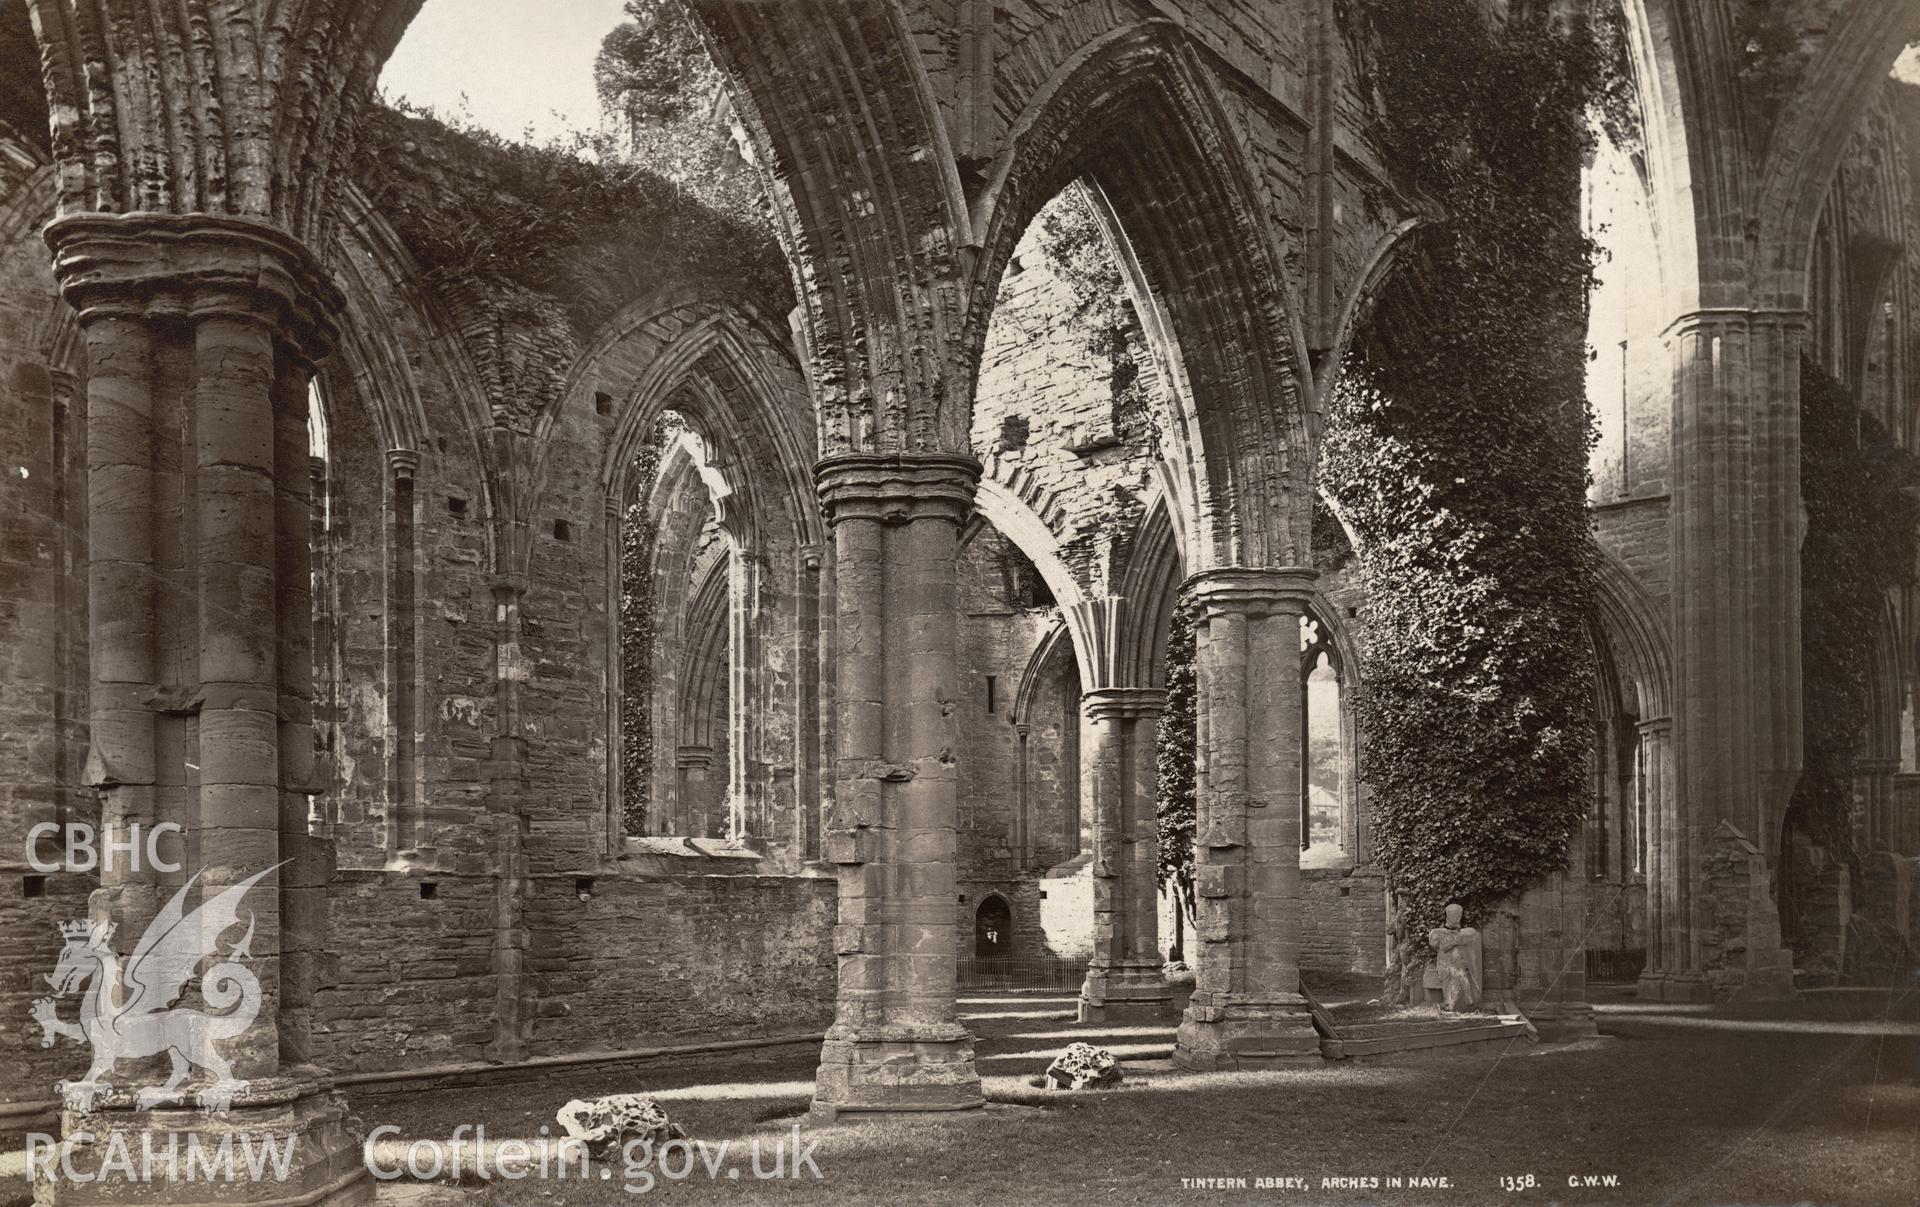 Digital copy of a circa 1870 albumen print of an interior view of Tintern Abbey showing arches in the nave.